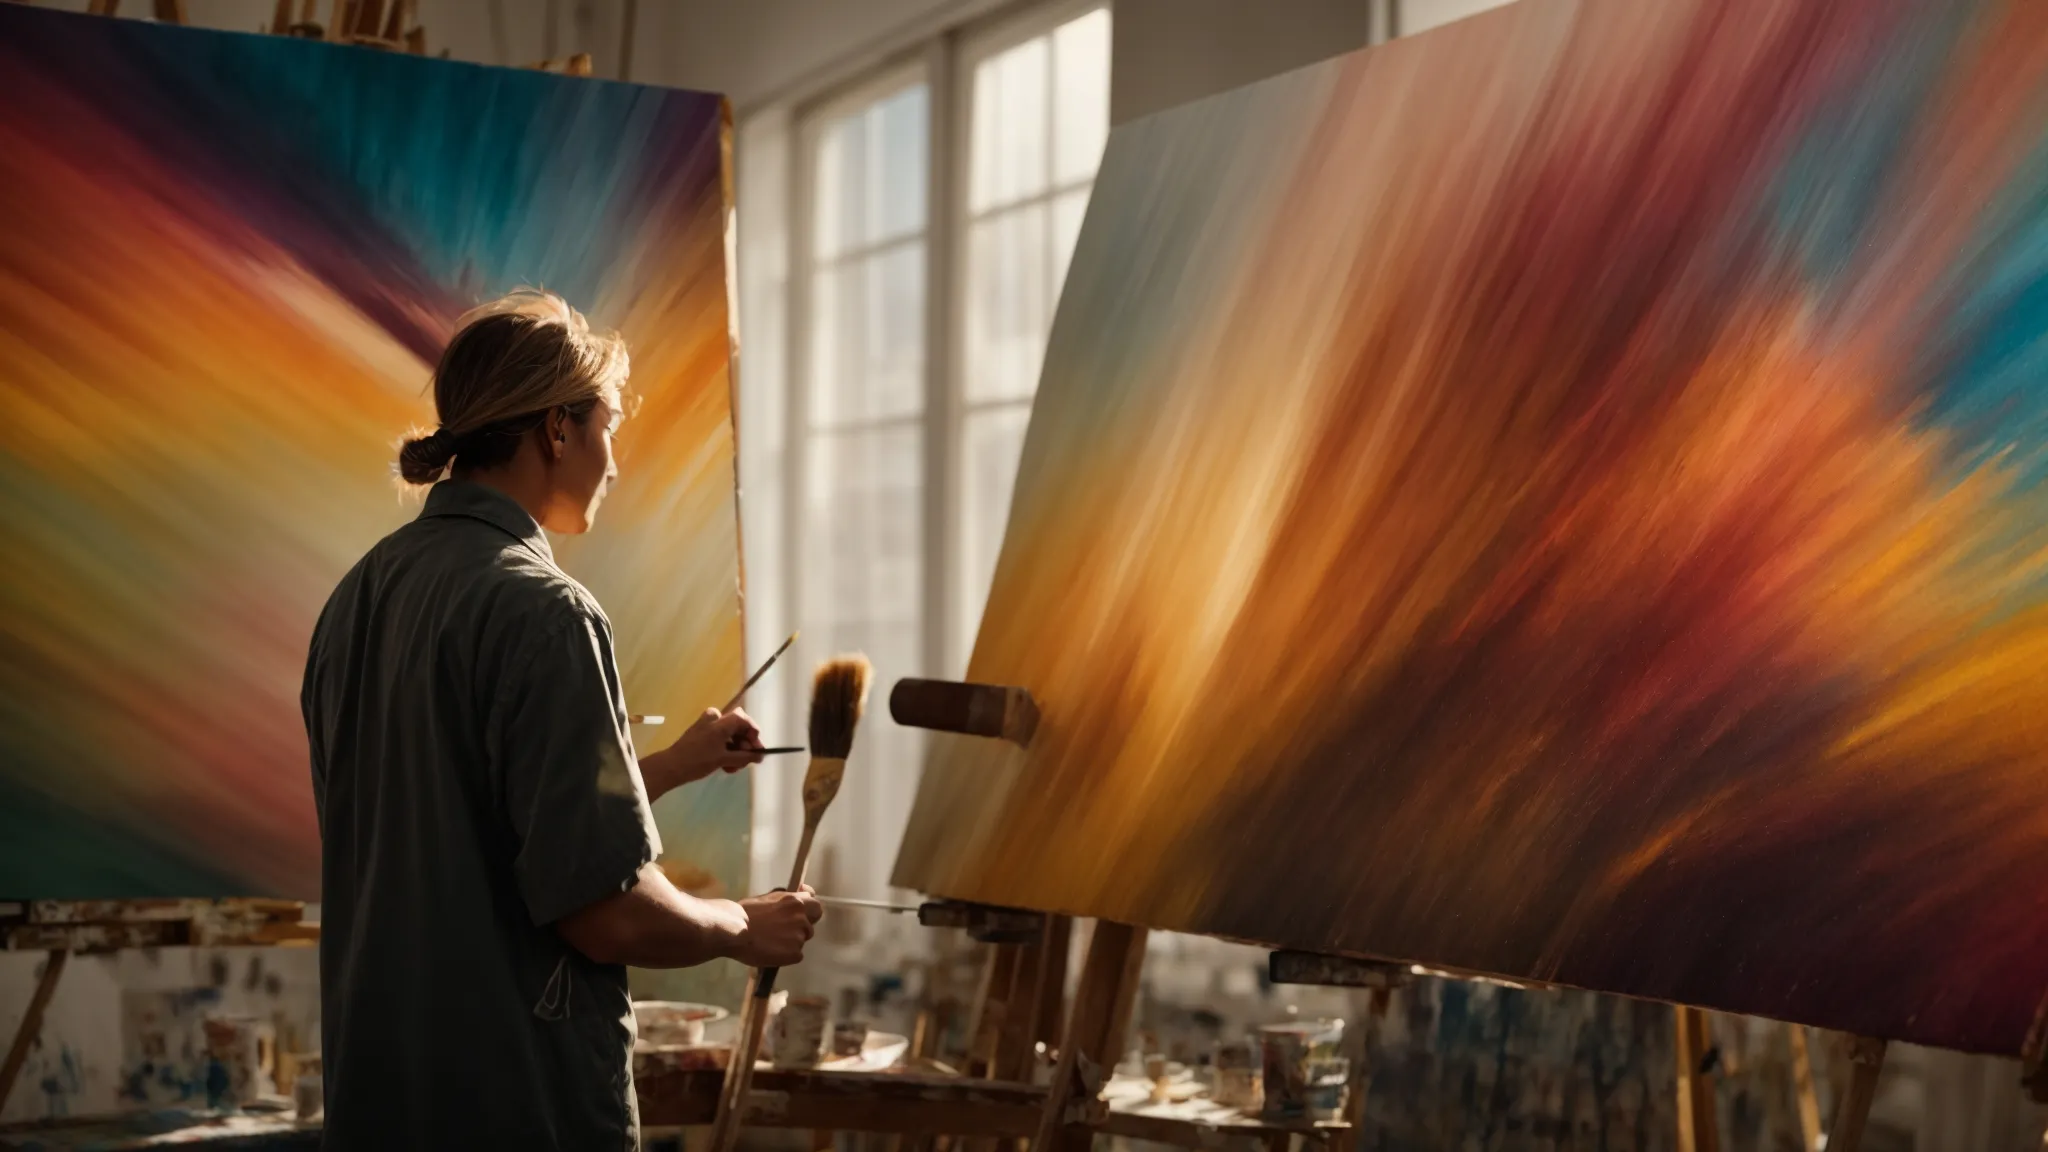 a painter intensely focusing on adding vibrant colors to a large canvas in a sunlit studio.